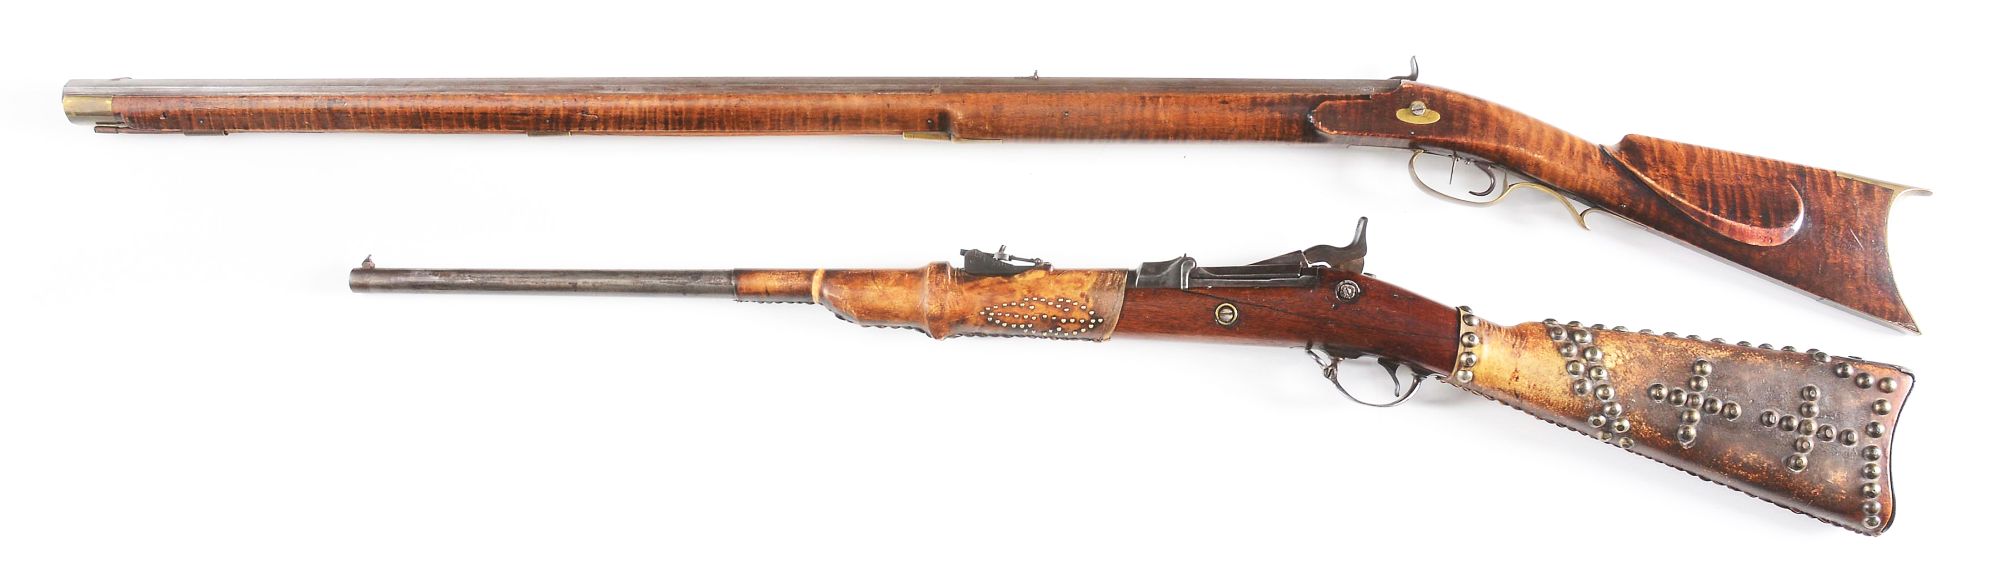 Two 19th Century Guns From The Collection Of Walter Cline, 59% OFF